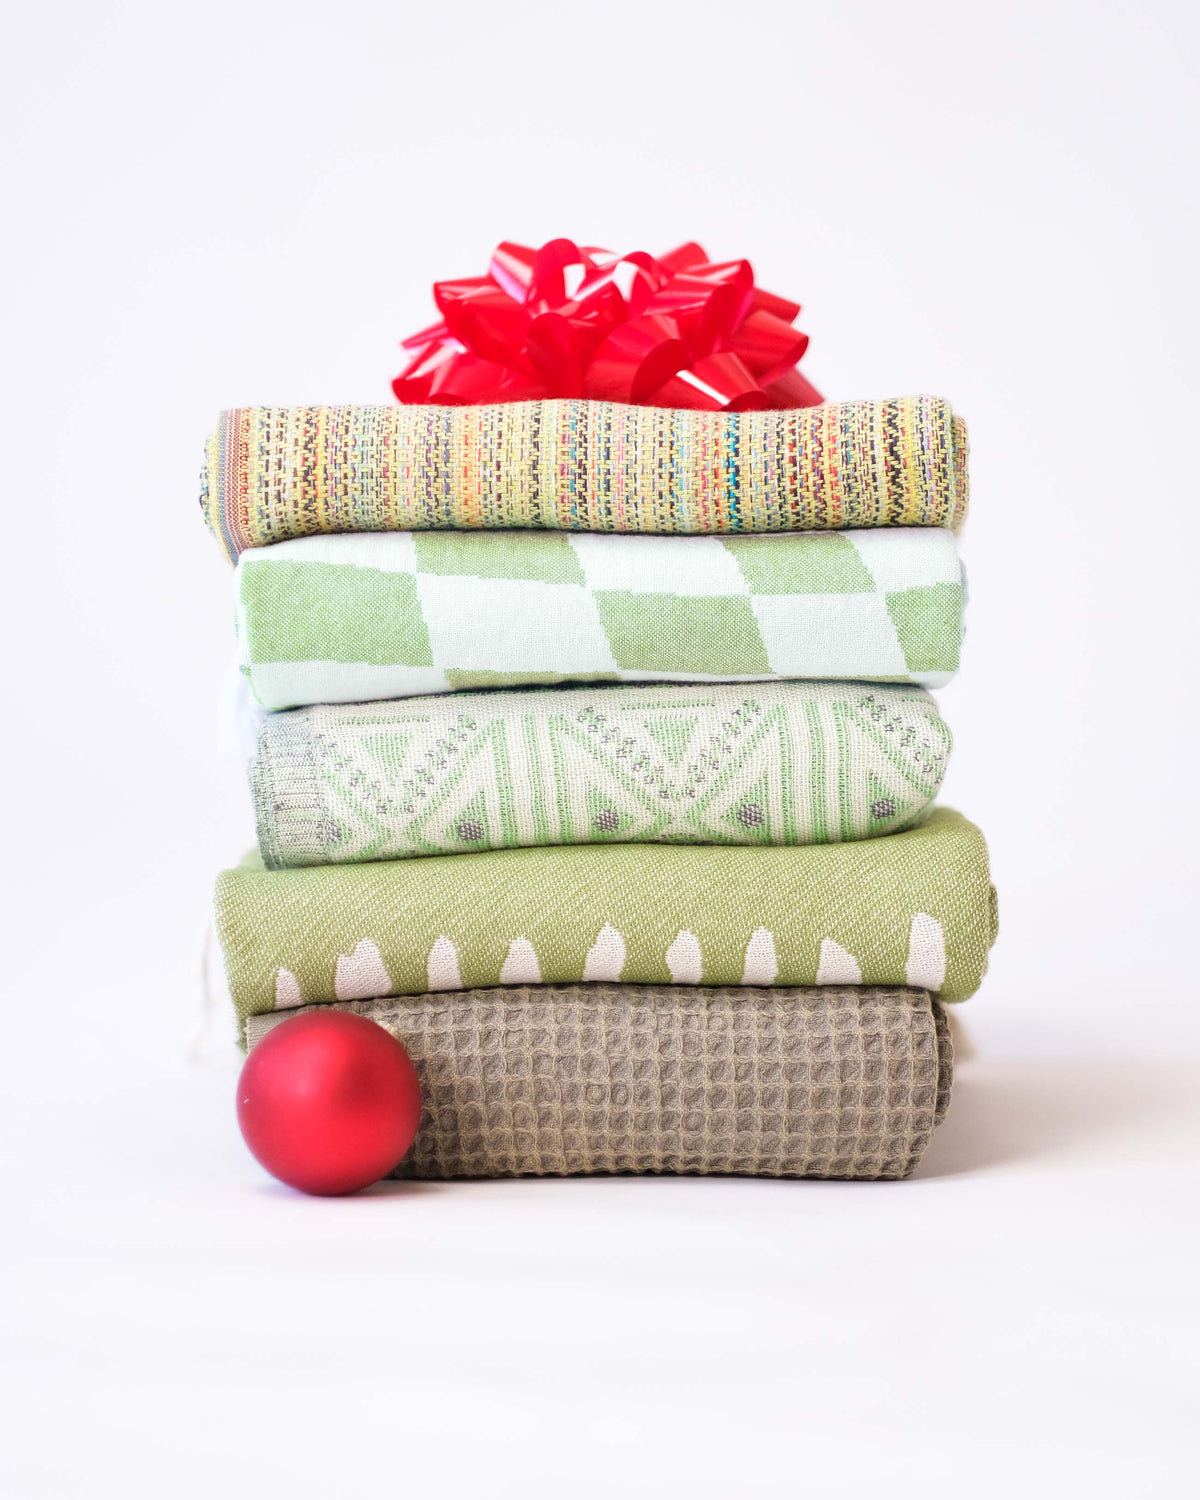 The Holiday Greens Bundle